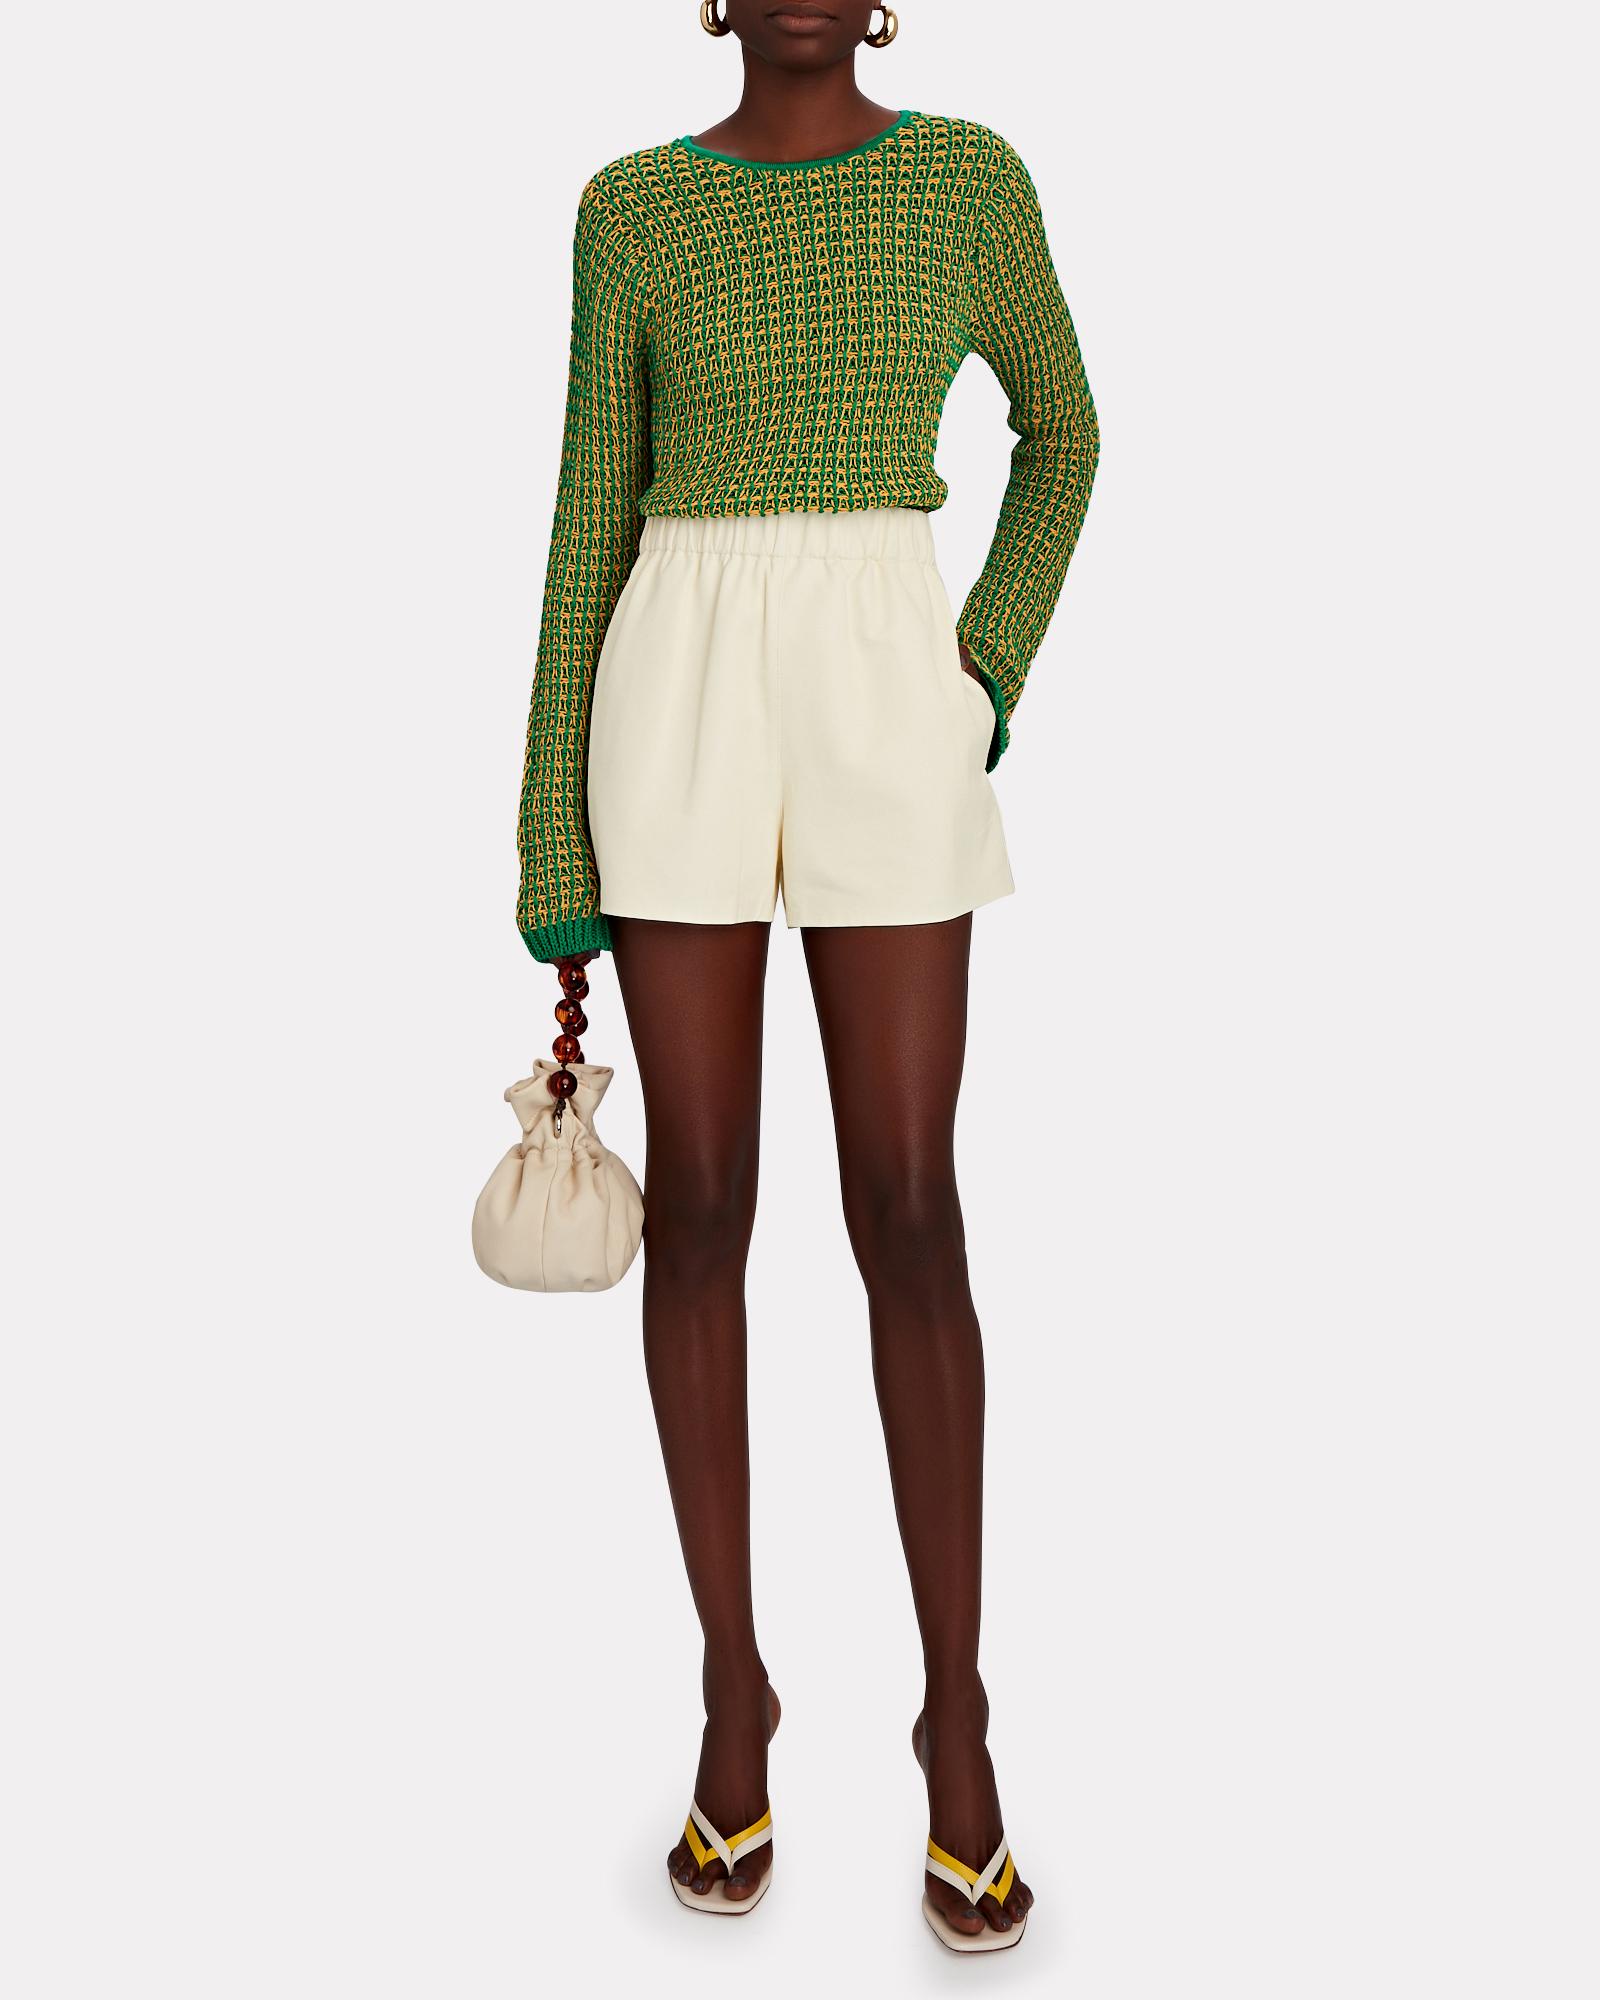 Kedelig Nævne Månens overflade 3.1 Phillip Lim Open-knit Cotton Sweater in Green | Lyst